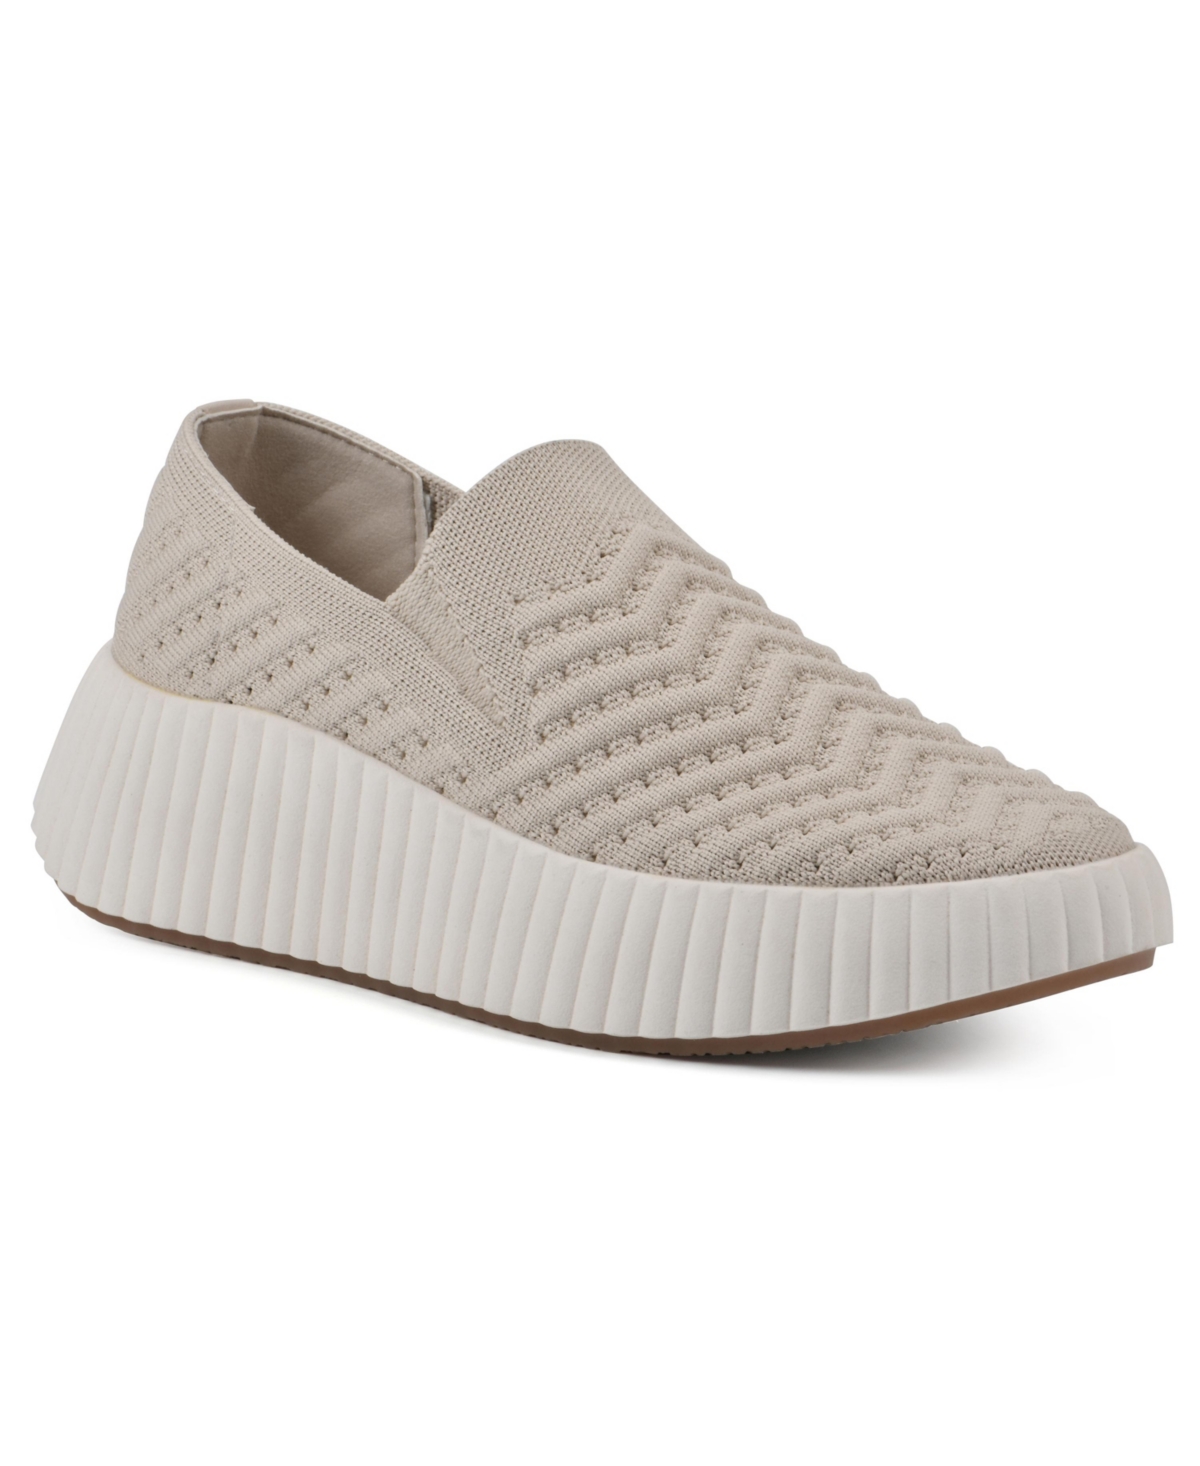 Women's Dyno Slip On Platform Sneakers - Taupe, Fabric